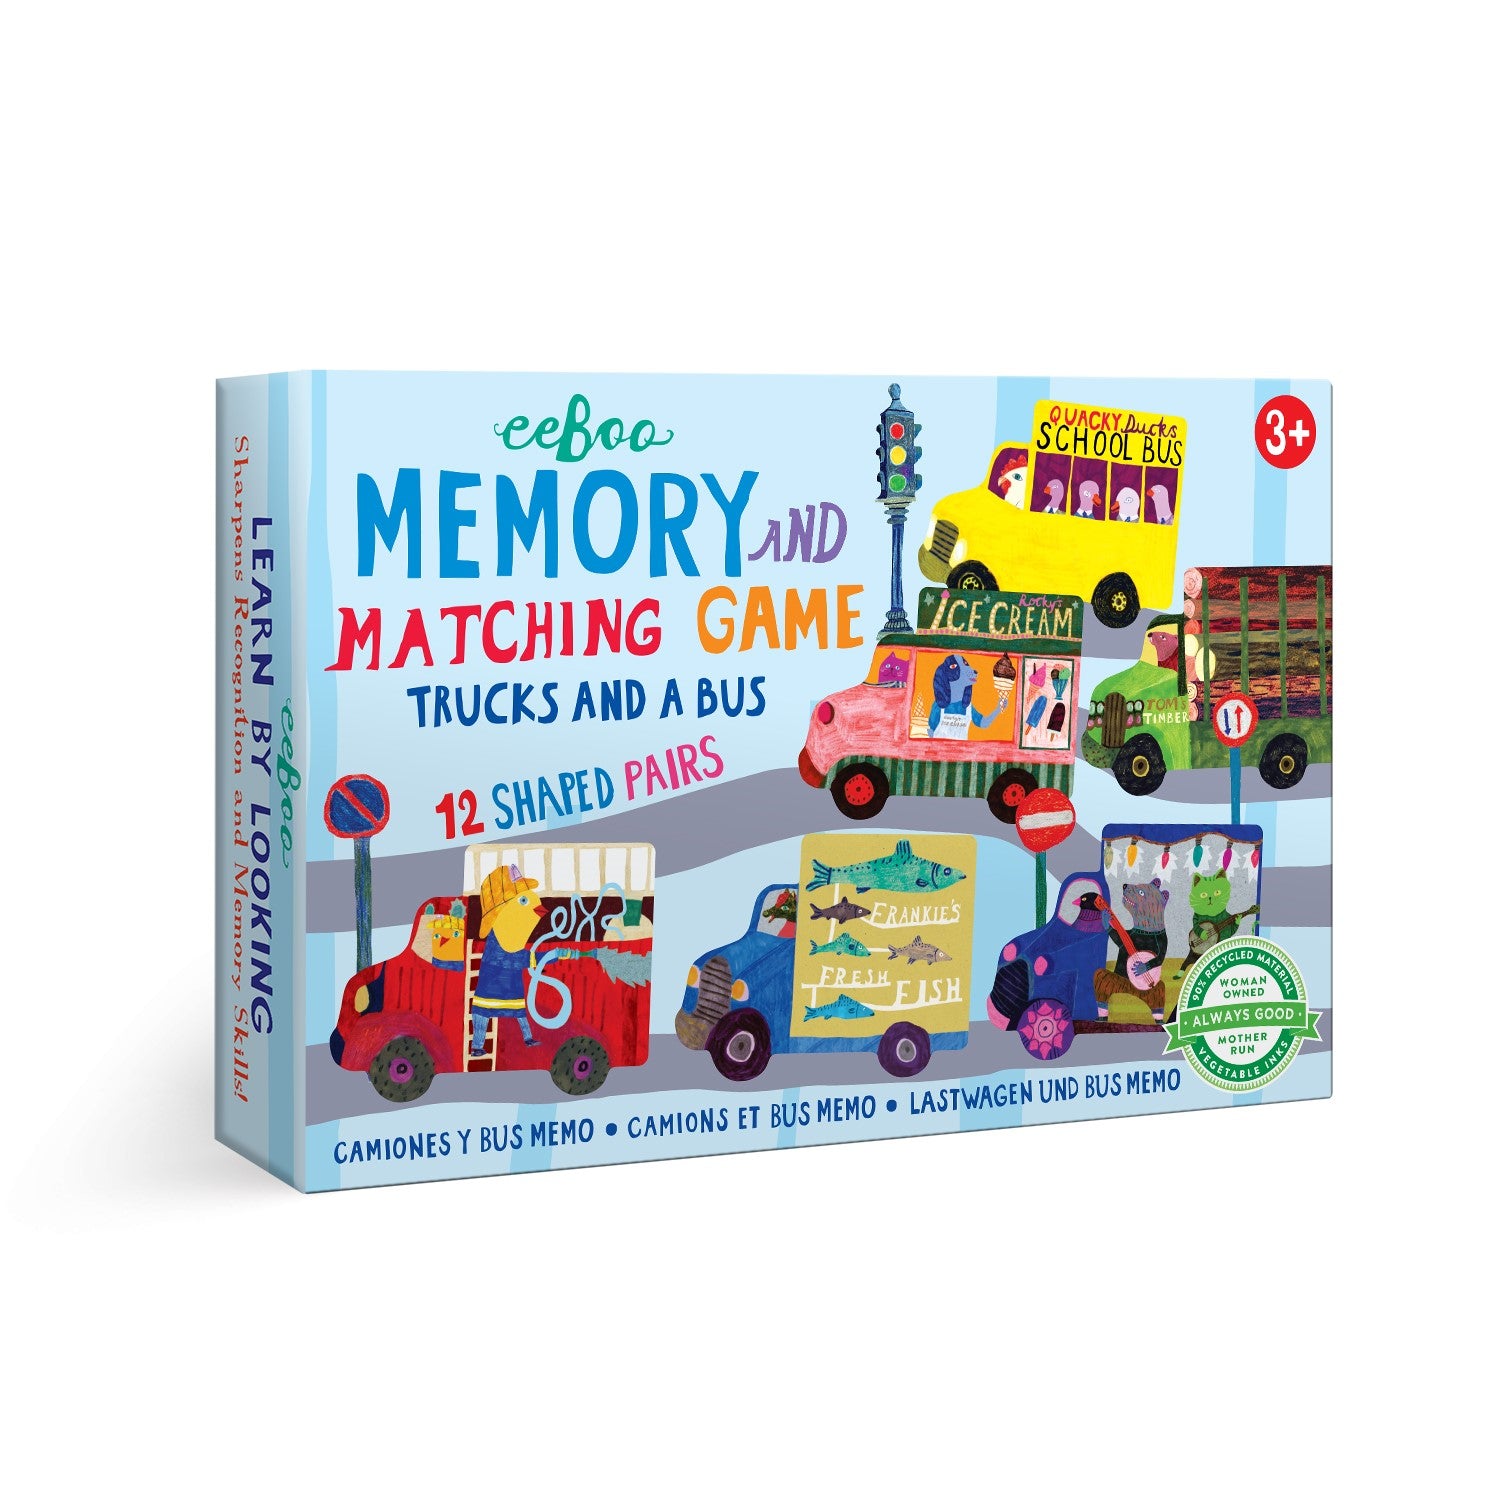 Trucks and a Bus Little Memory Matching Game eeBoo